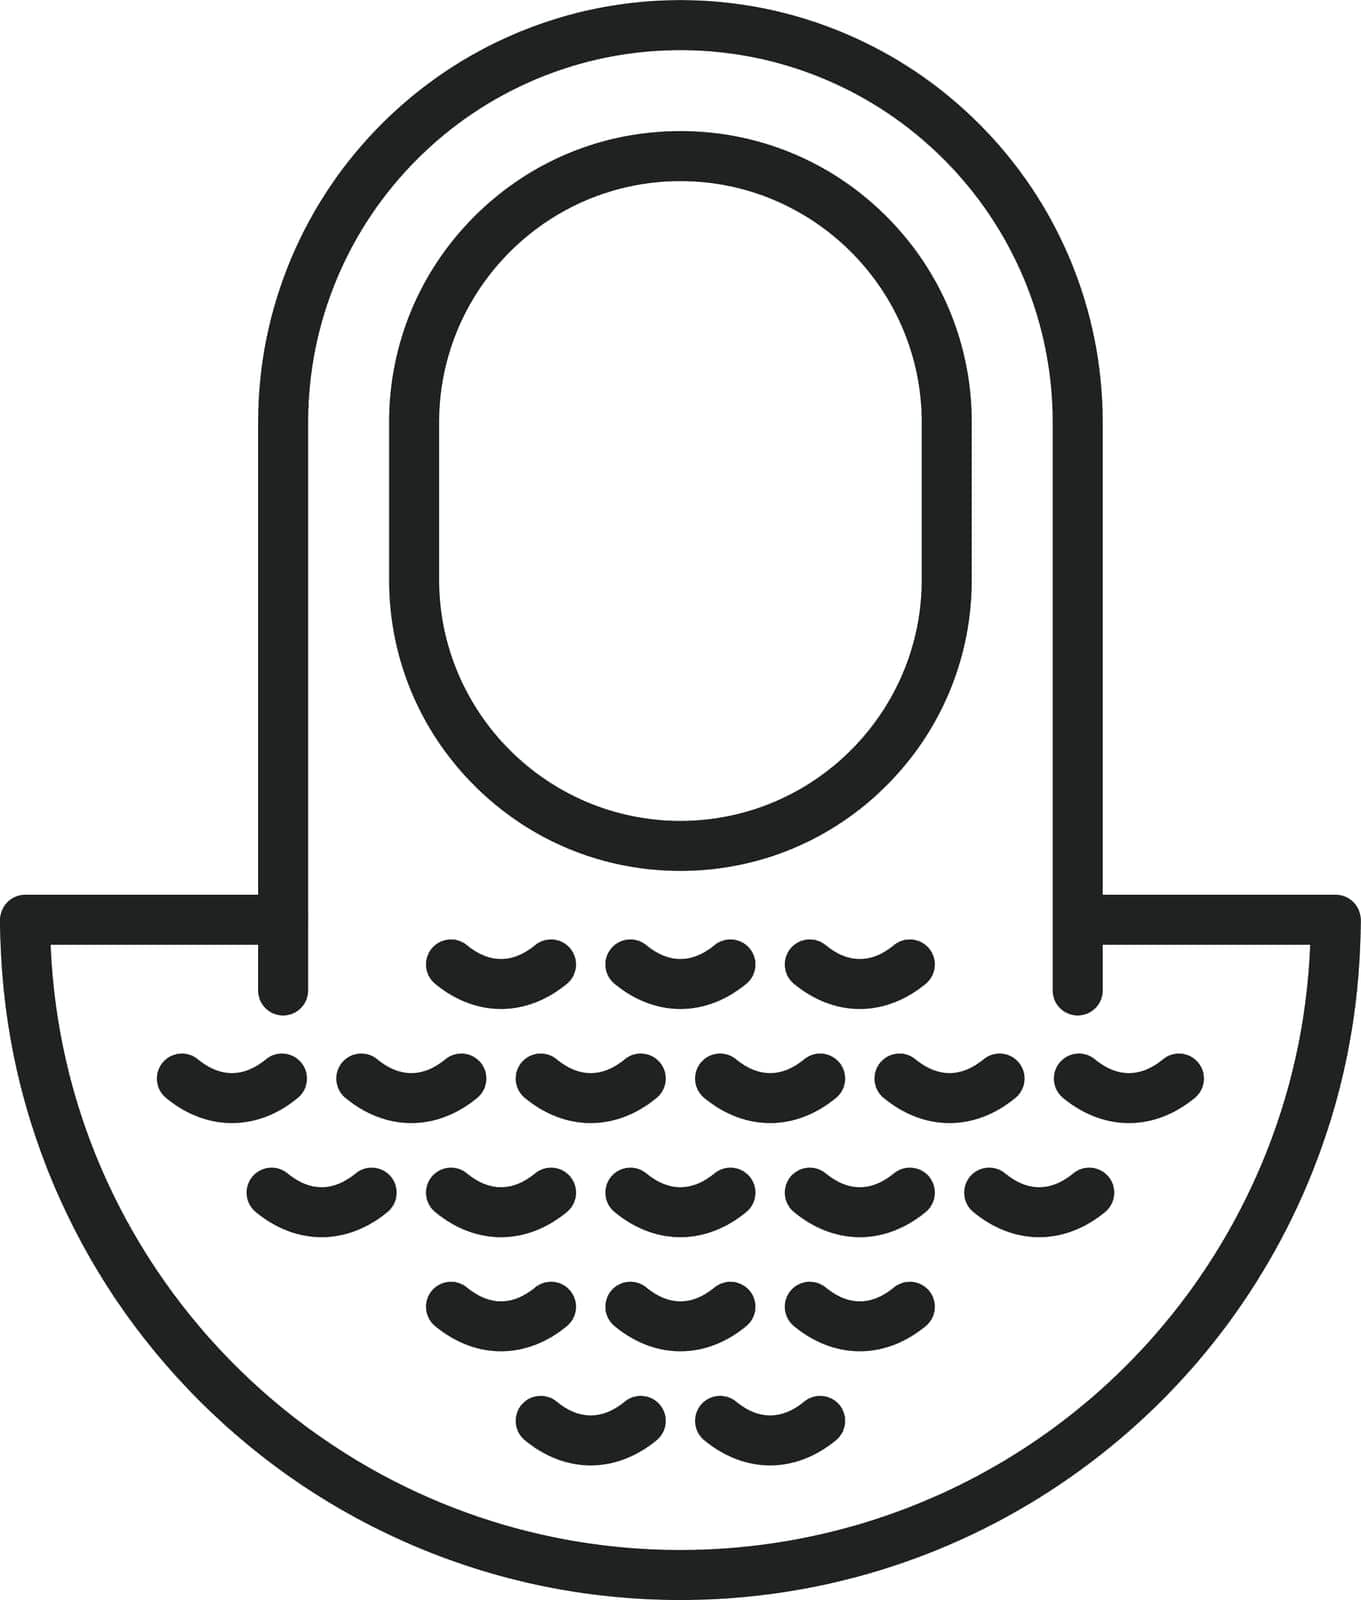 Chainmail icon vector image. Suitable for mobile application web application and print media.